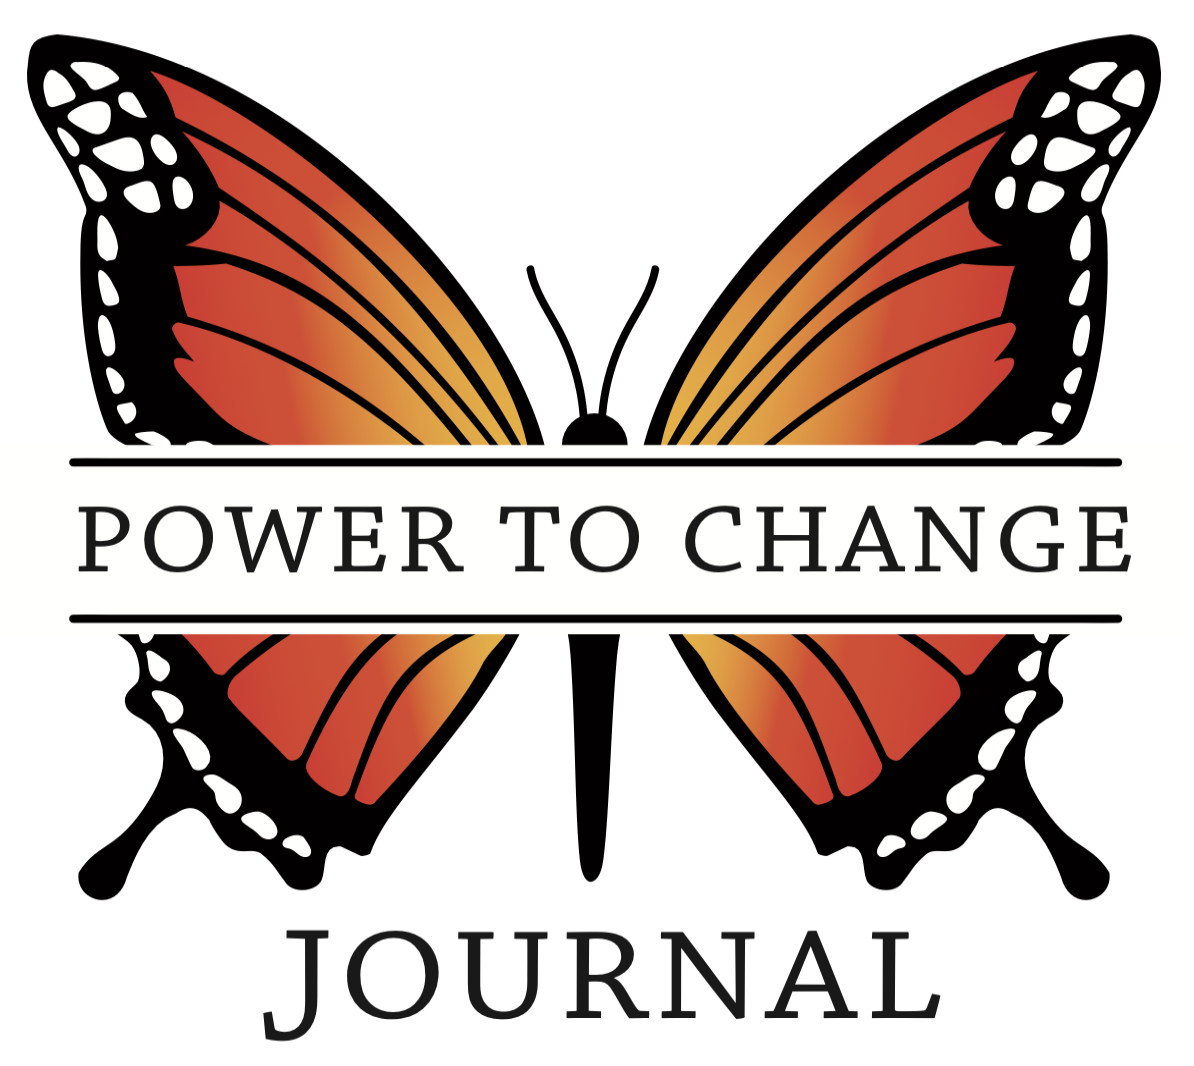 The Power to Change Journal